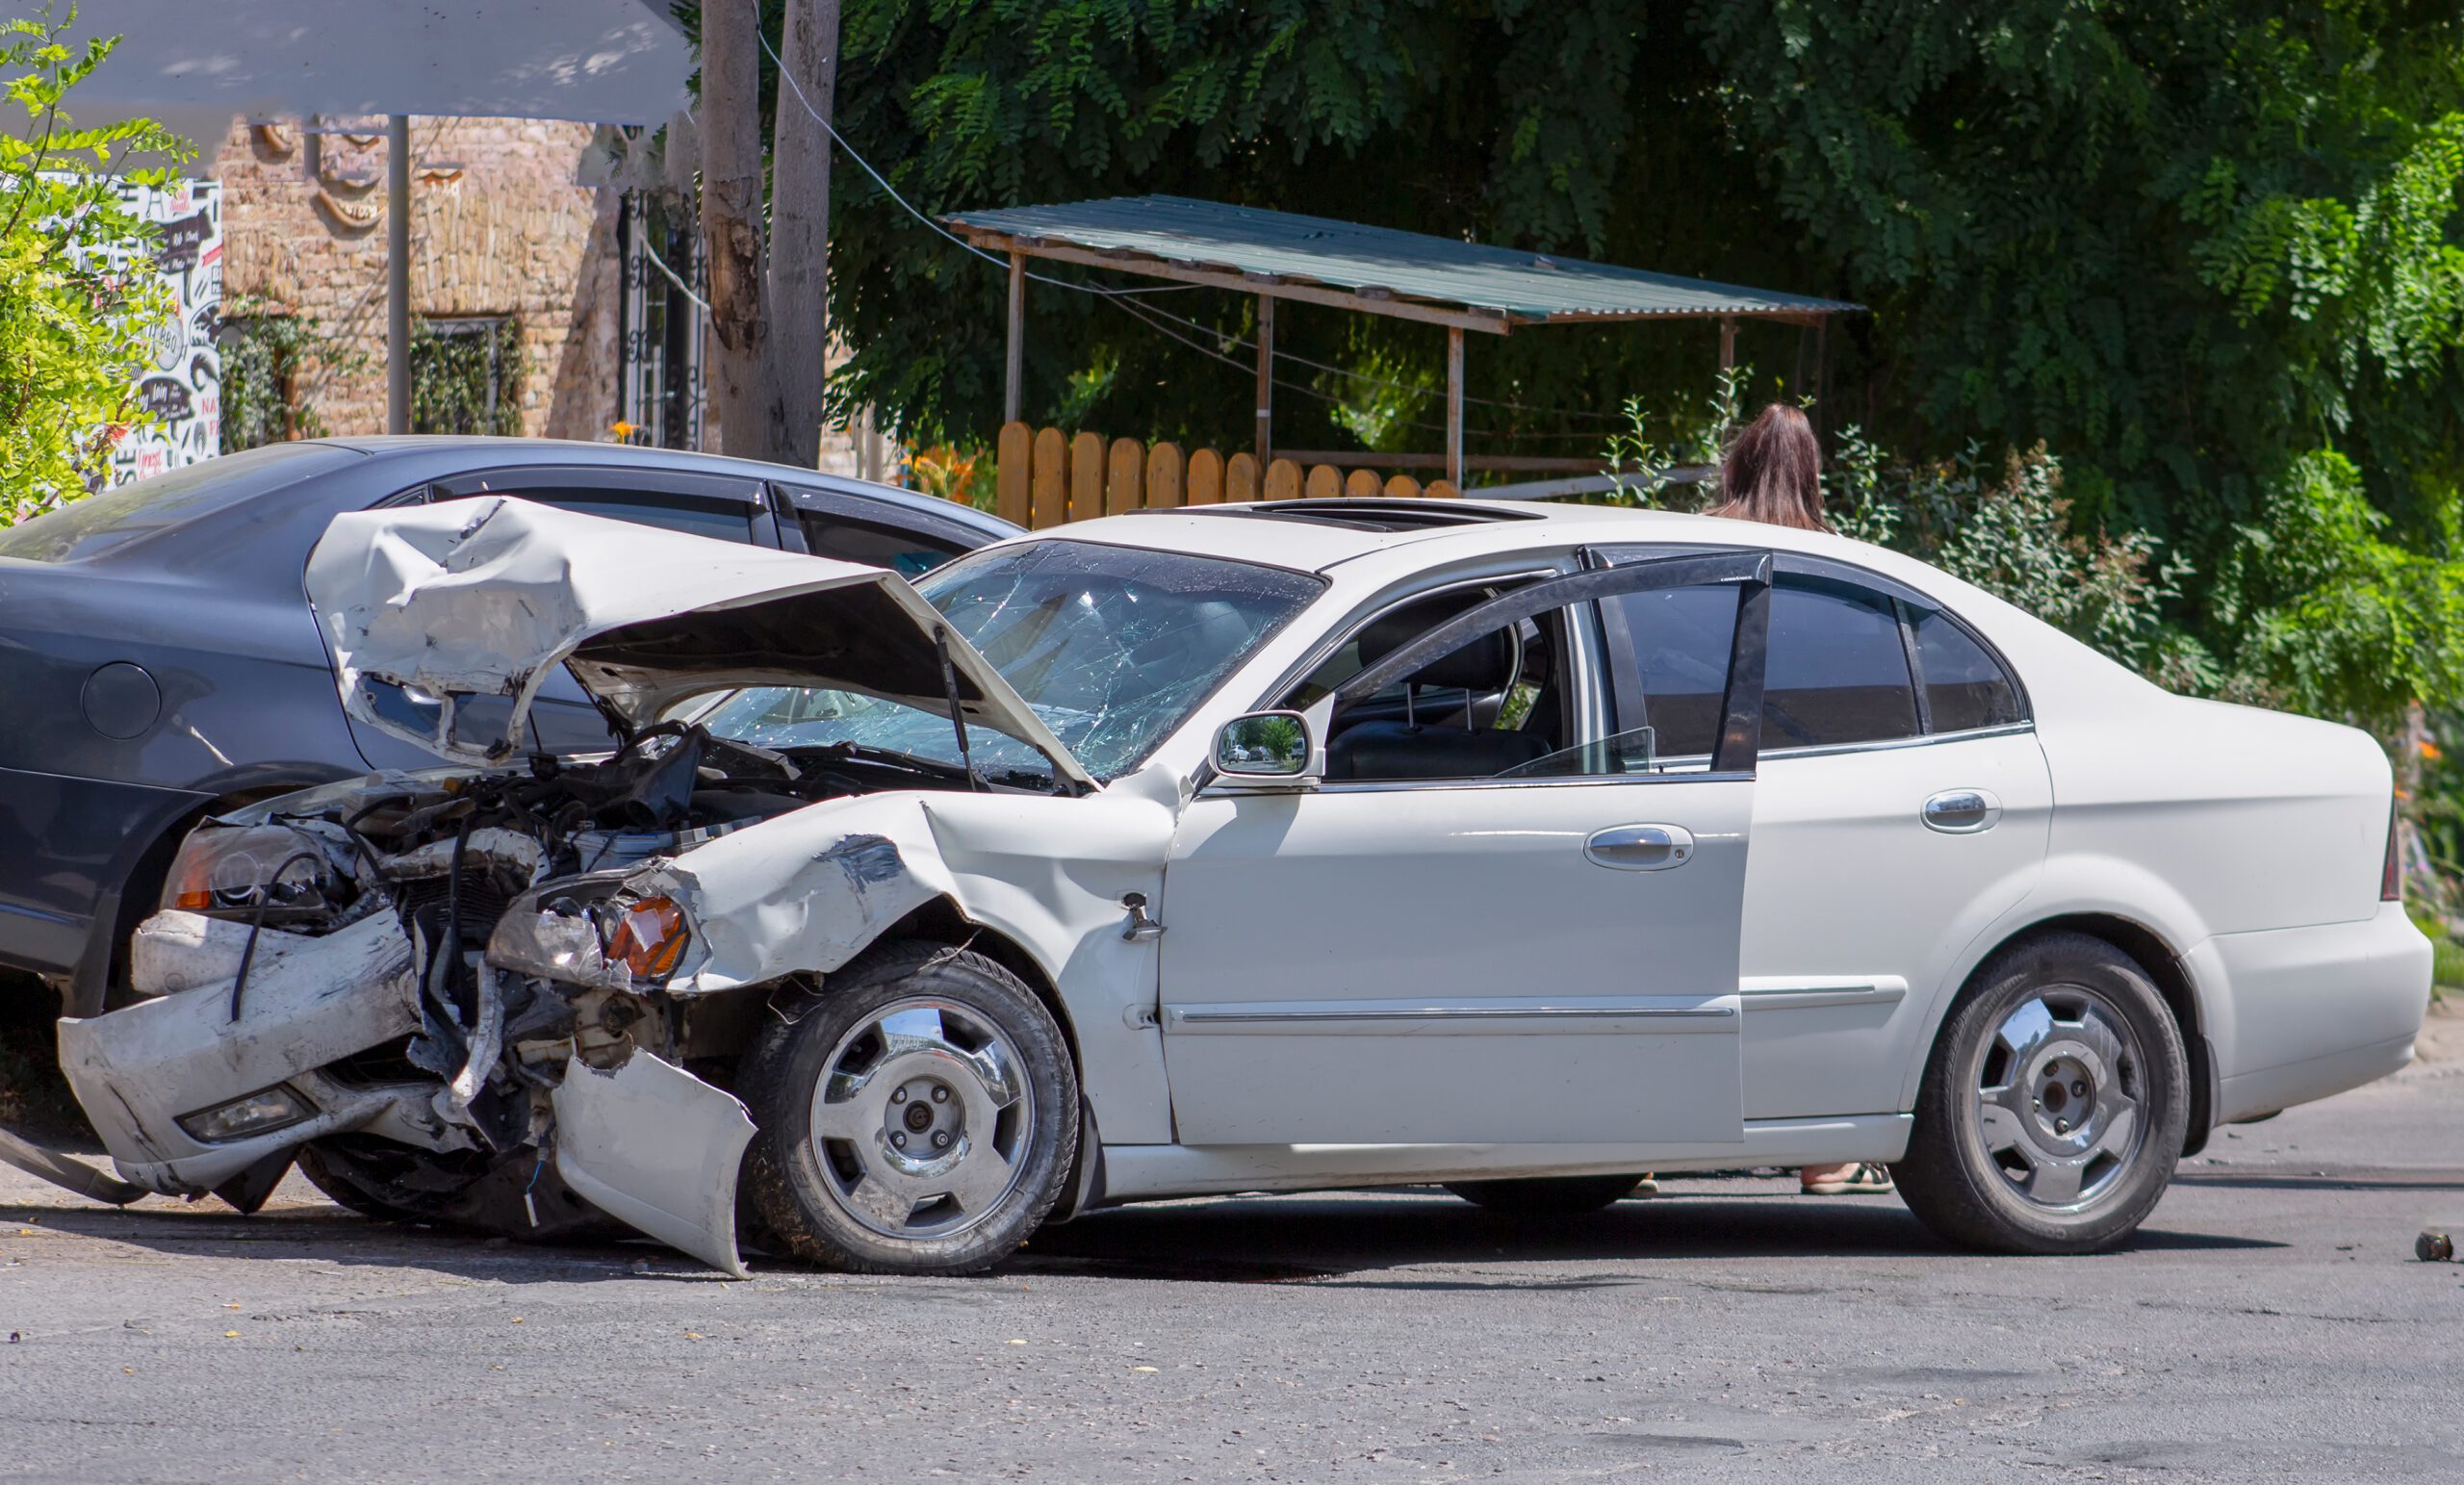 Top Six Most Common Injuries From Auto Accidents